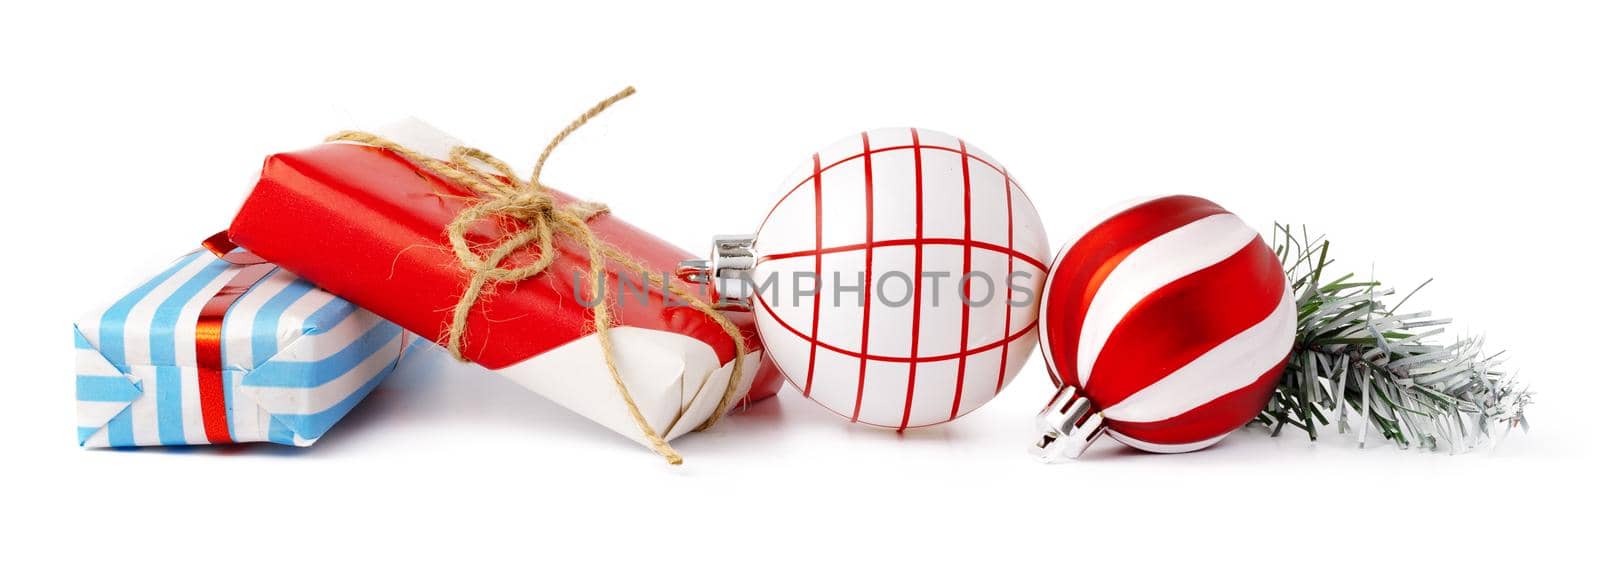 Christmas baubles and festive gift box isolated on white background by Fabrikasimf